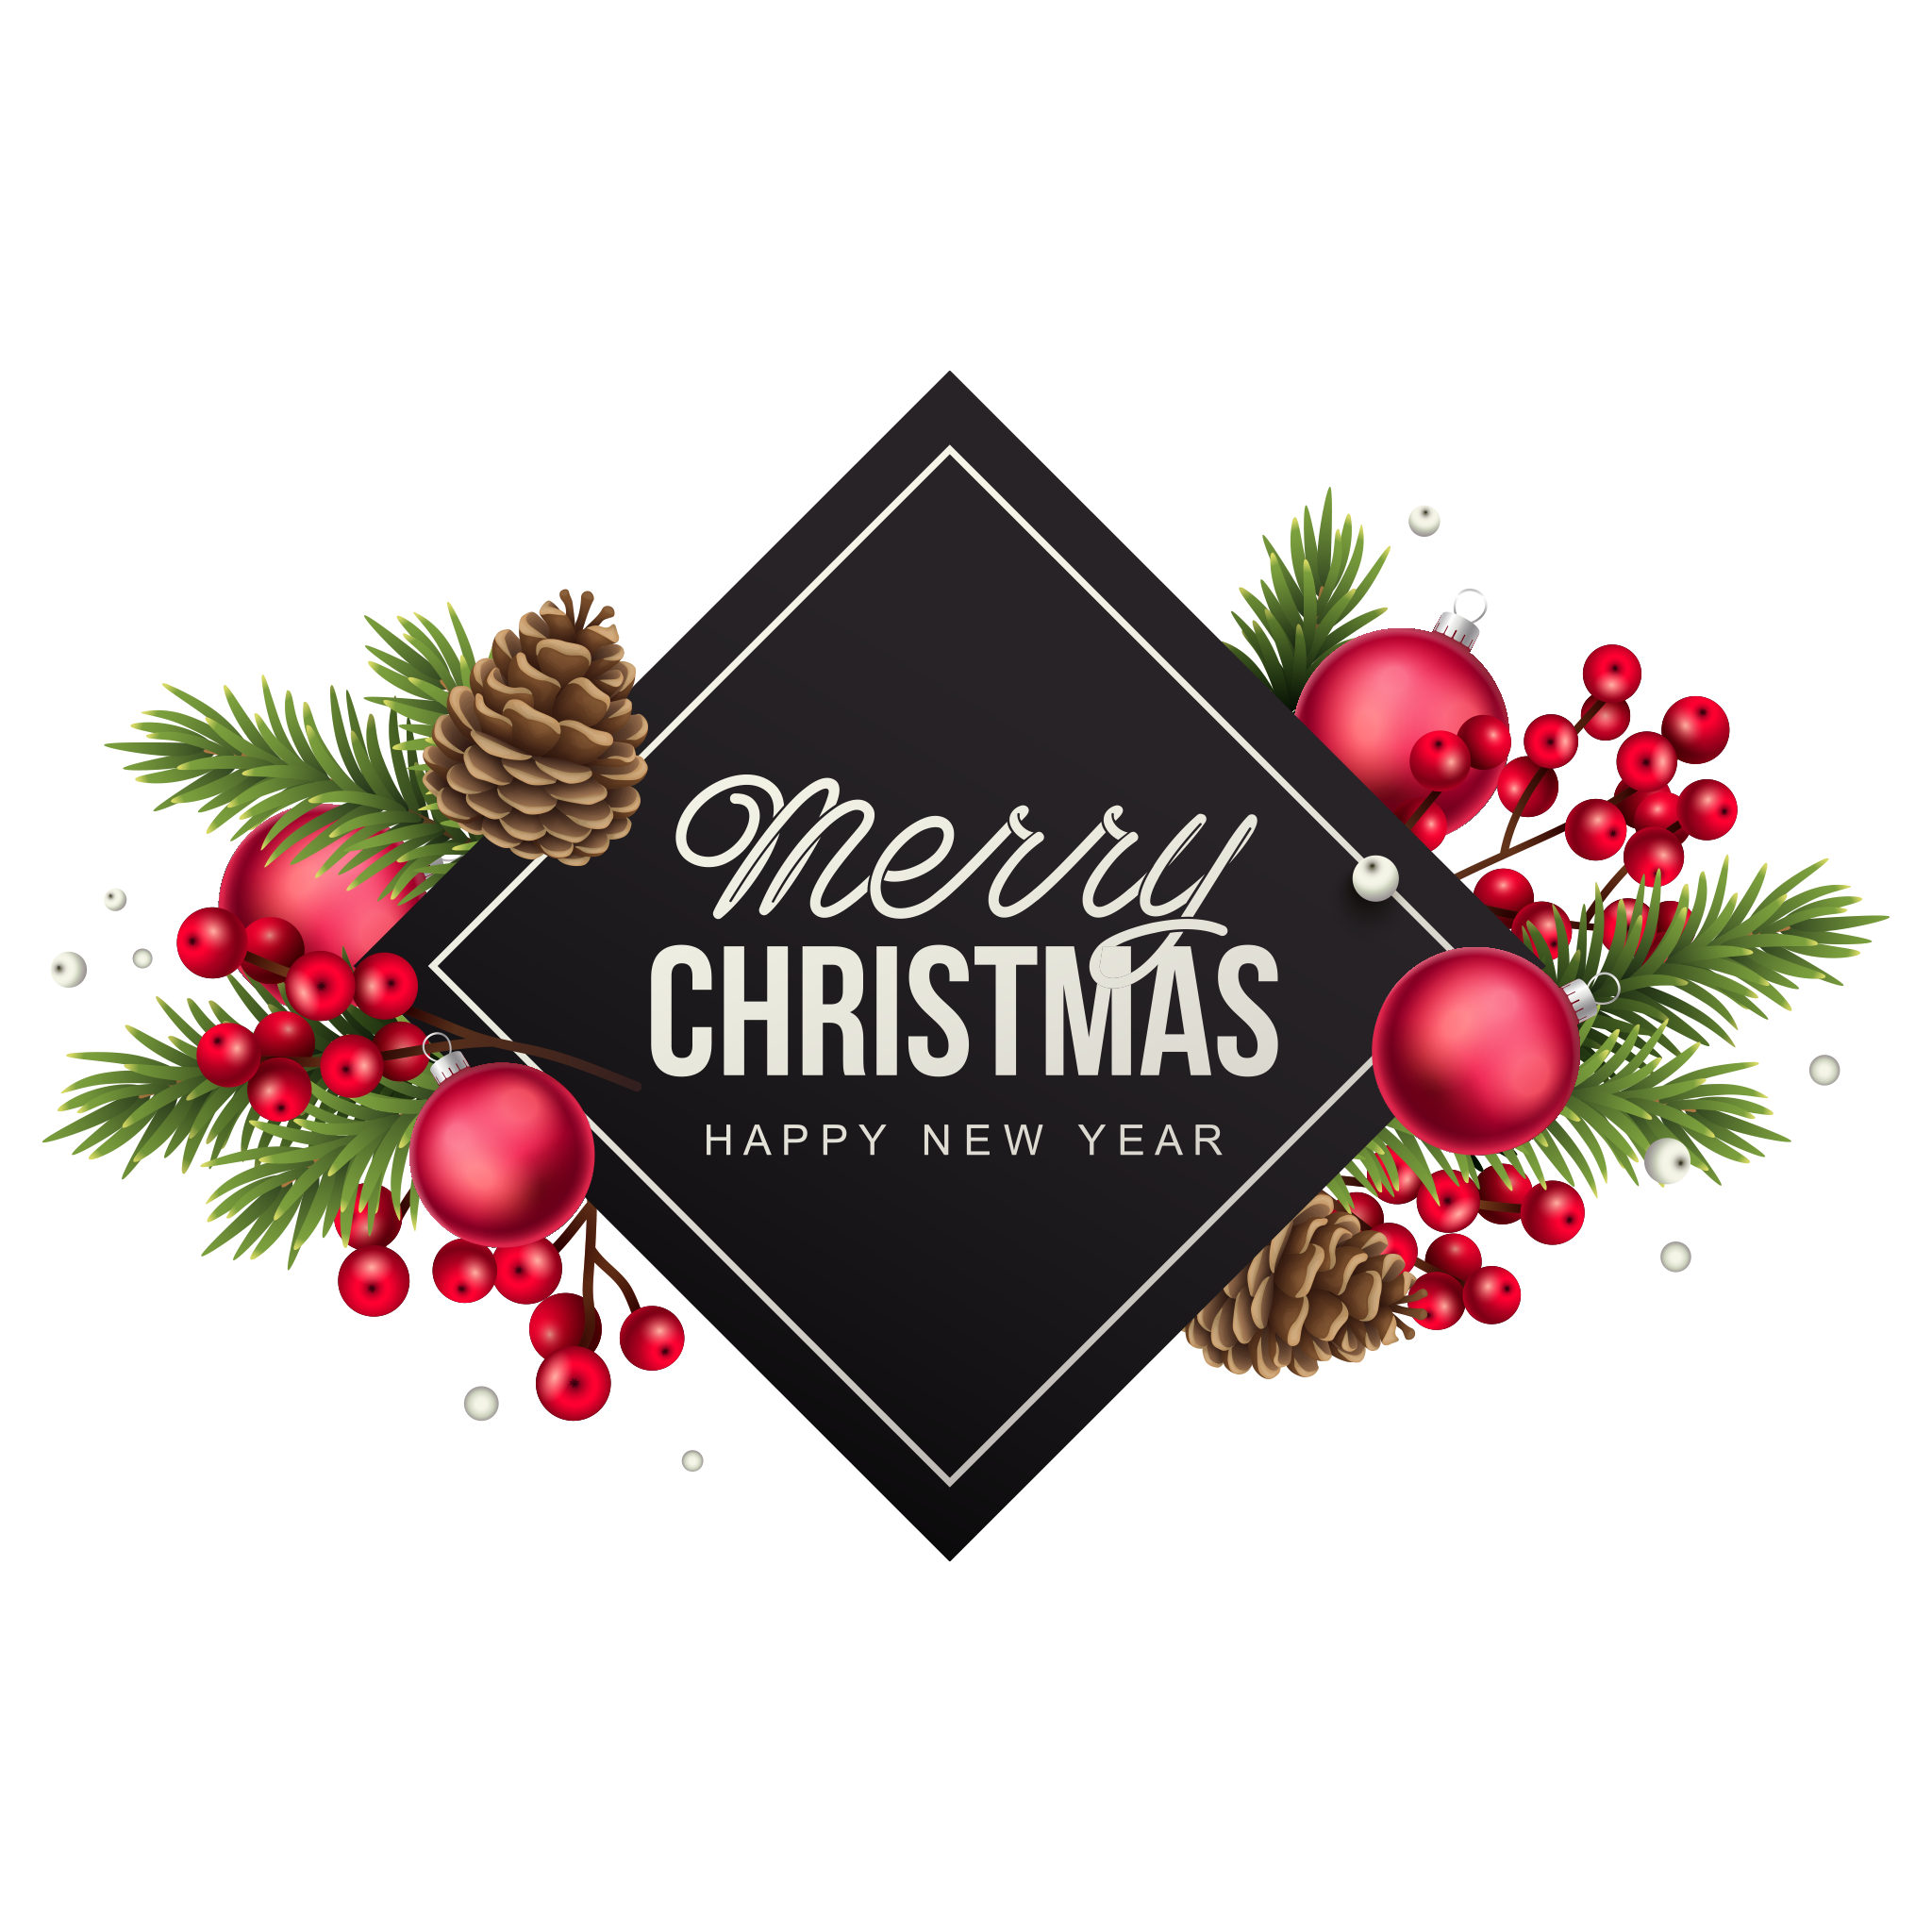 Merry Christmas Celebration PNG Images HD